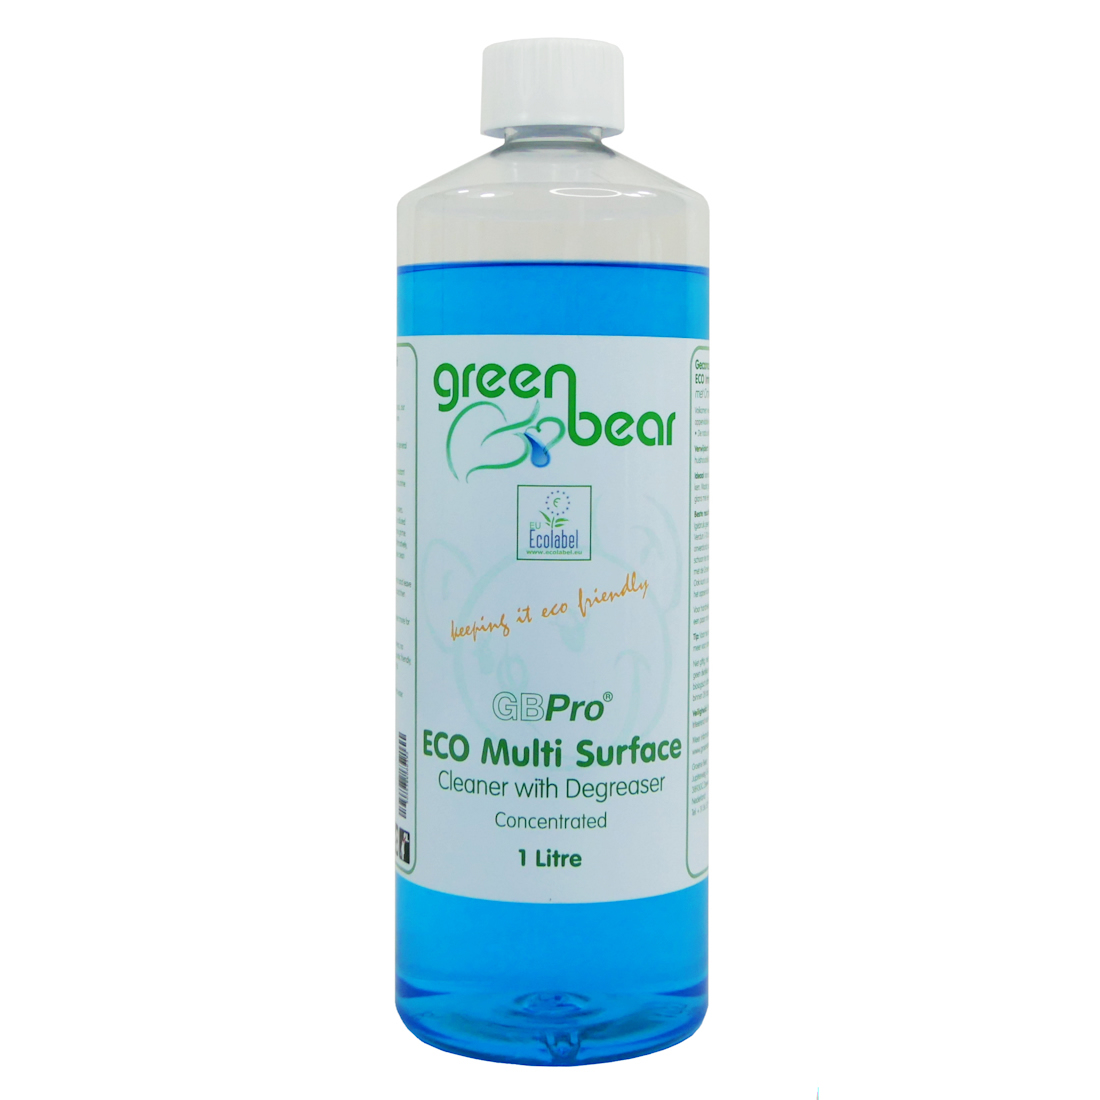 GBPro Eco Friendly Multi Surface Cleaner and degreaser - concentrated  1 litre